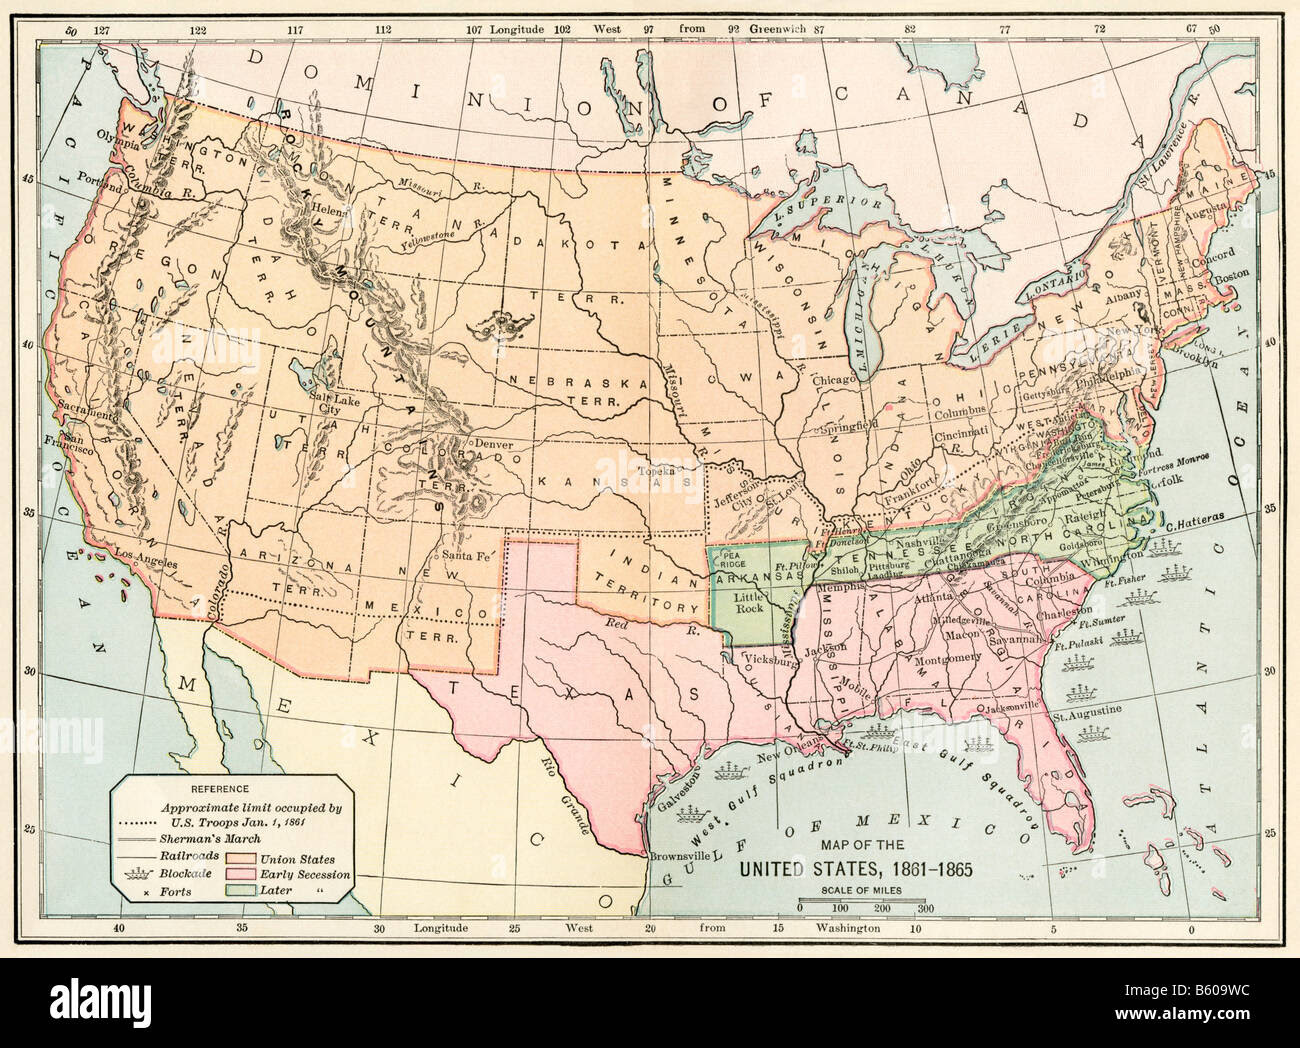 Map Us States During The Civil War 1861 65 | Free Nude Porn Photos